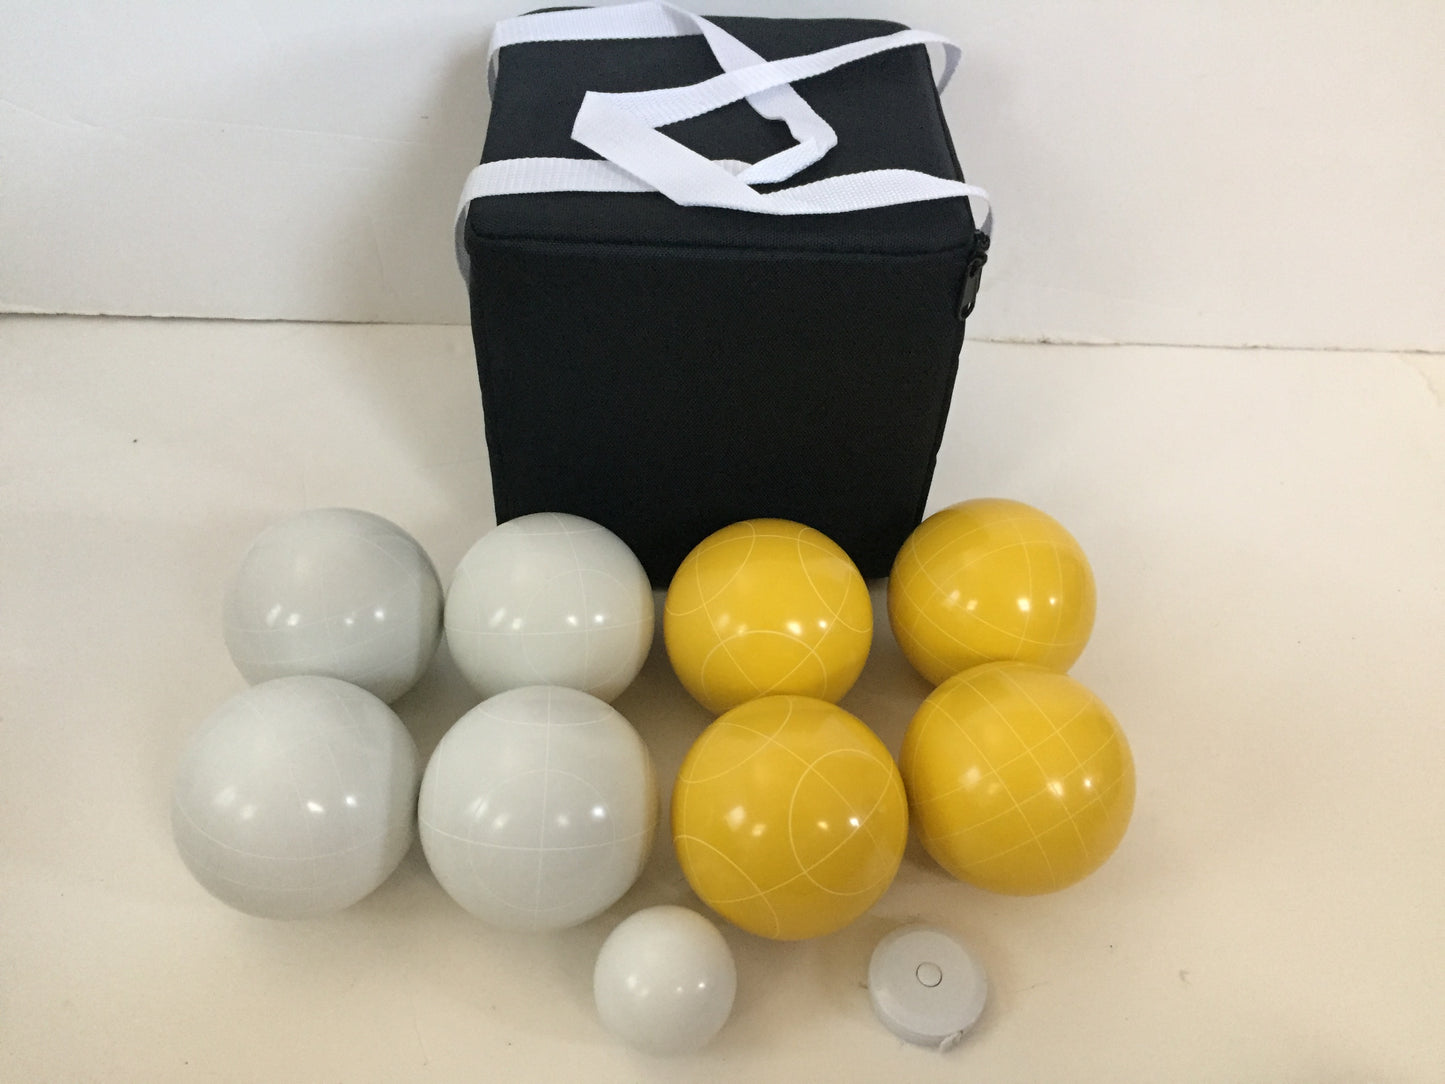 107mm with White and Yellow Balls with Black Bag